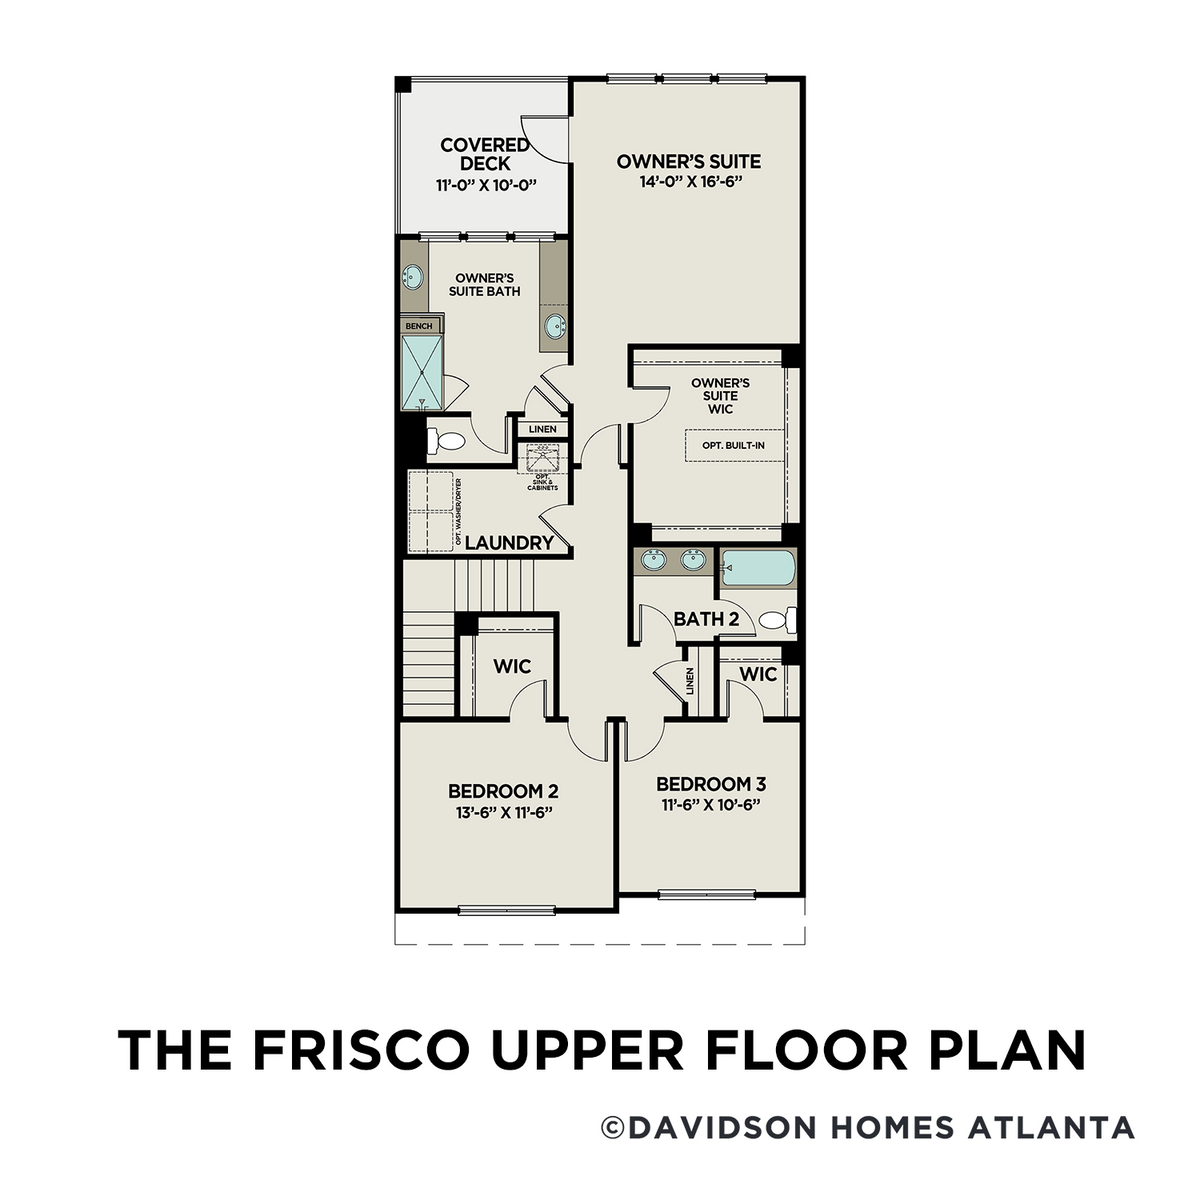 2 - The Frisco A floor plan layout for 695 Stickley Oak Way in Davidson Homes' The Village at Towne Lake community.